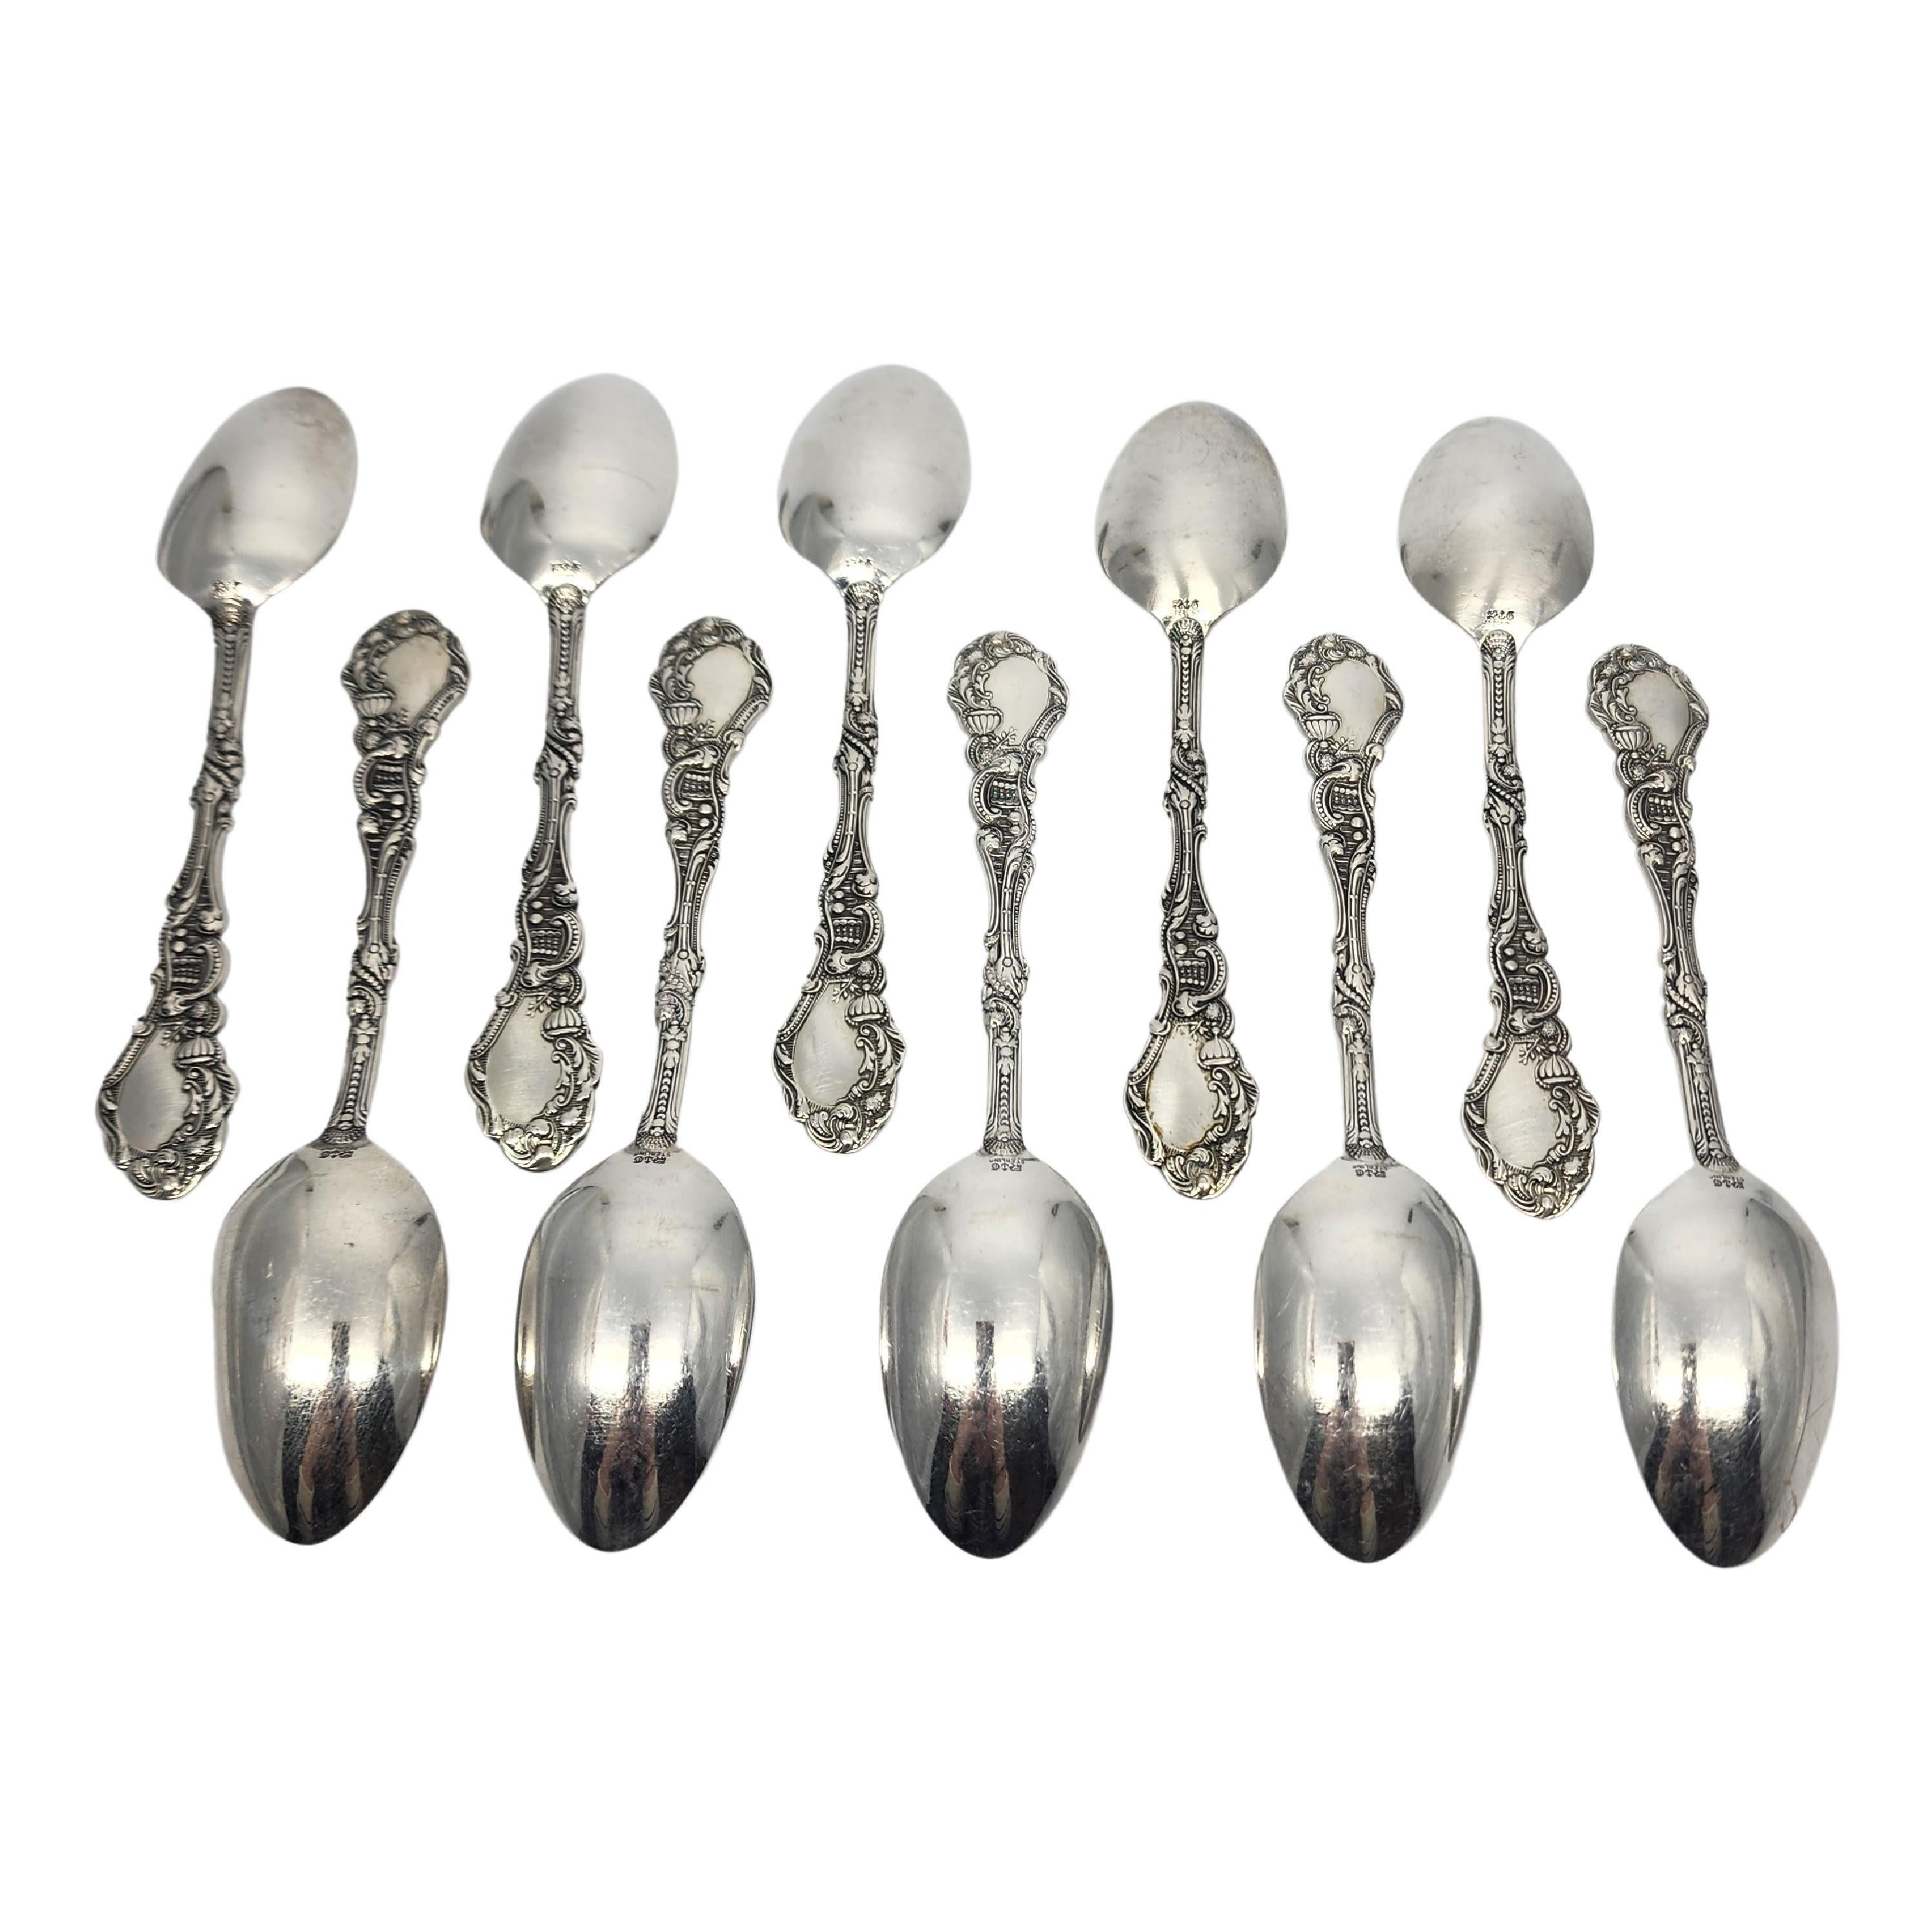 Set of 10 sterling silver teaspoons by Gorham in the Versailles pattern.

No monogram.

Gorham's Versailles is a multi motif pattern designed by Antoine Heller in 1885. Named for the Palace of Versailles, the pattern depicts ornate scenes of